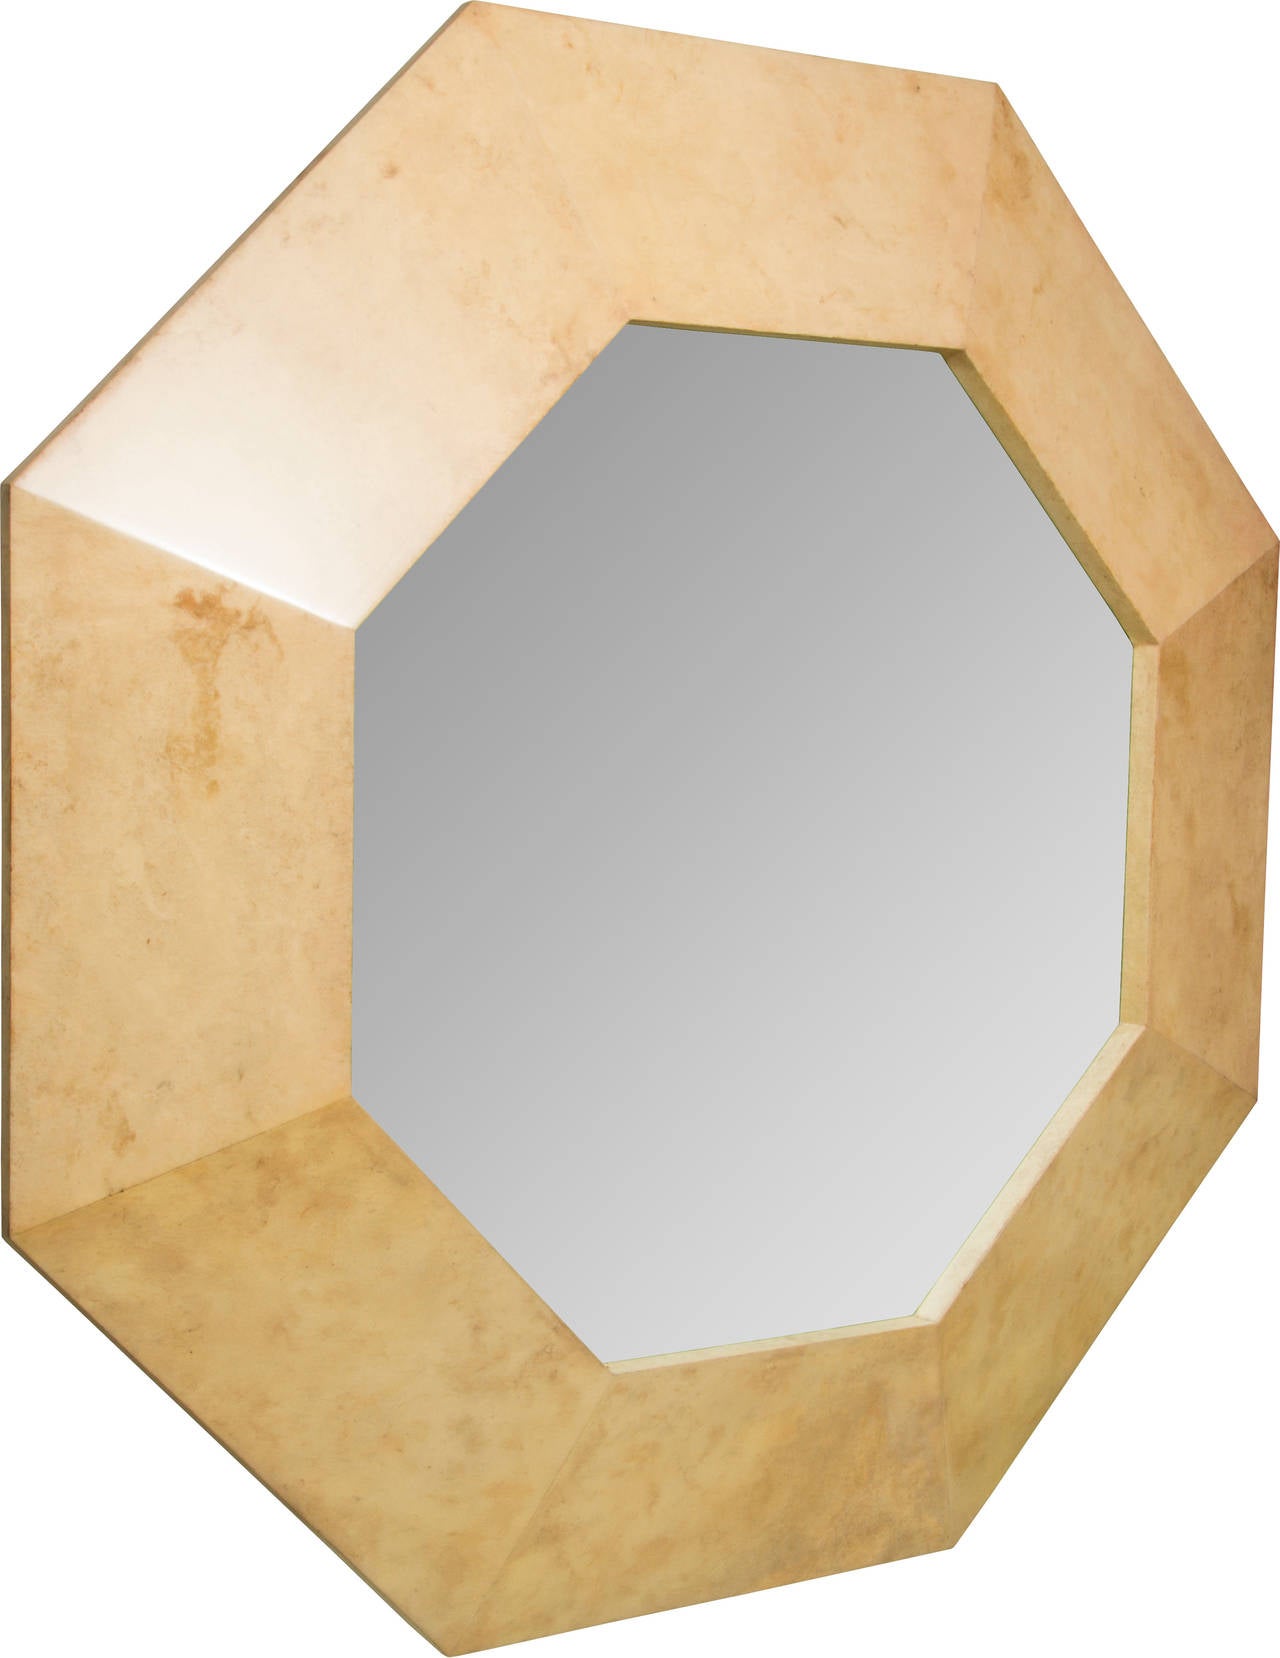 This mirror was one of several removed from a building in Chicago. They were supposedly by Karl Springer and the frame is parchment over wood.